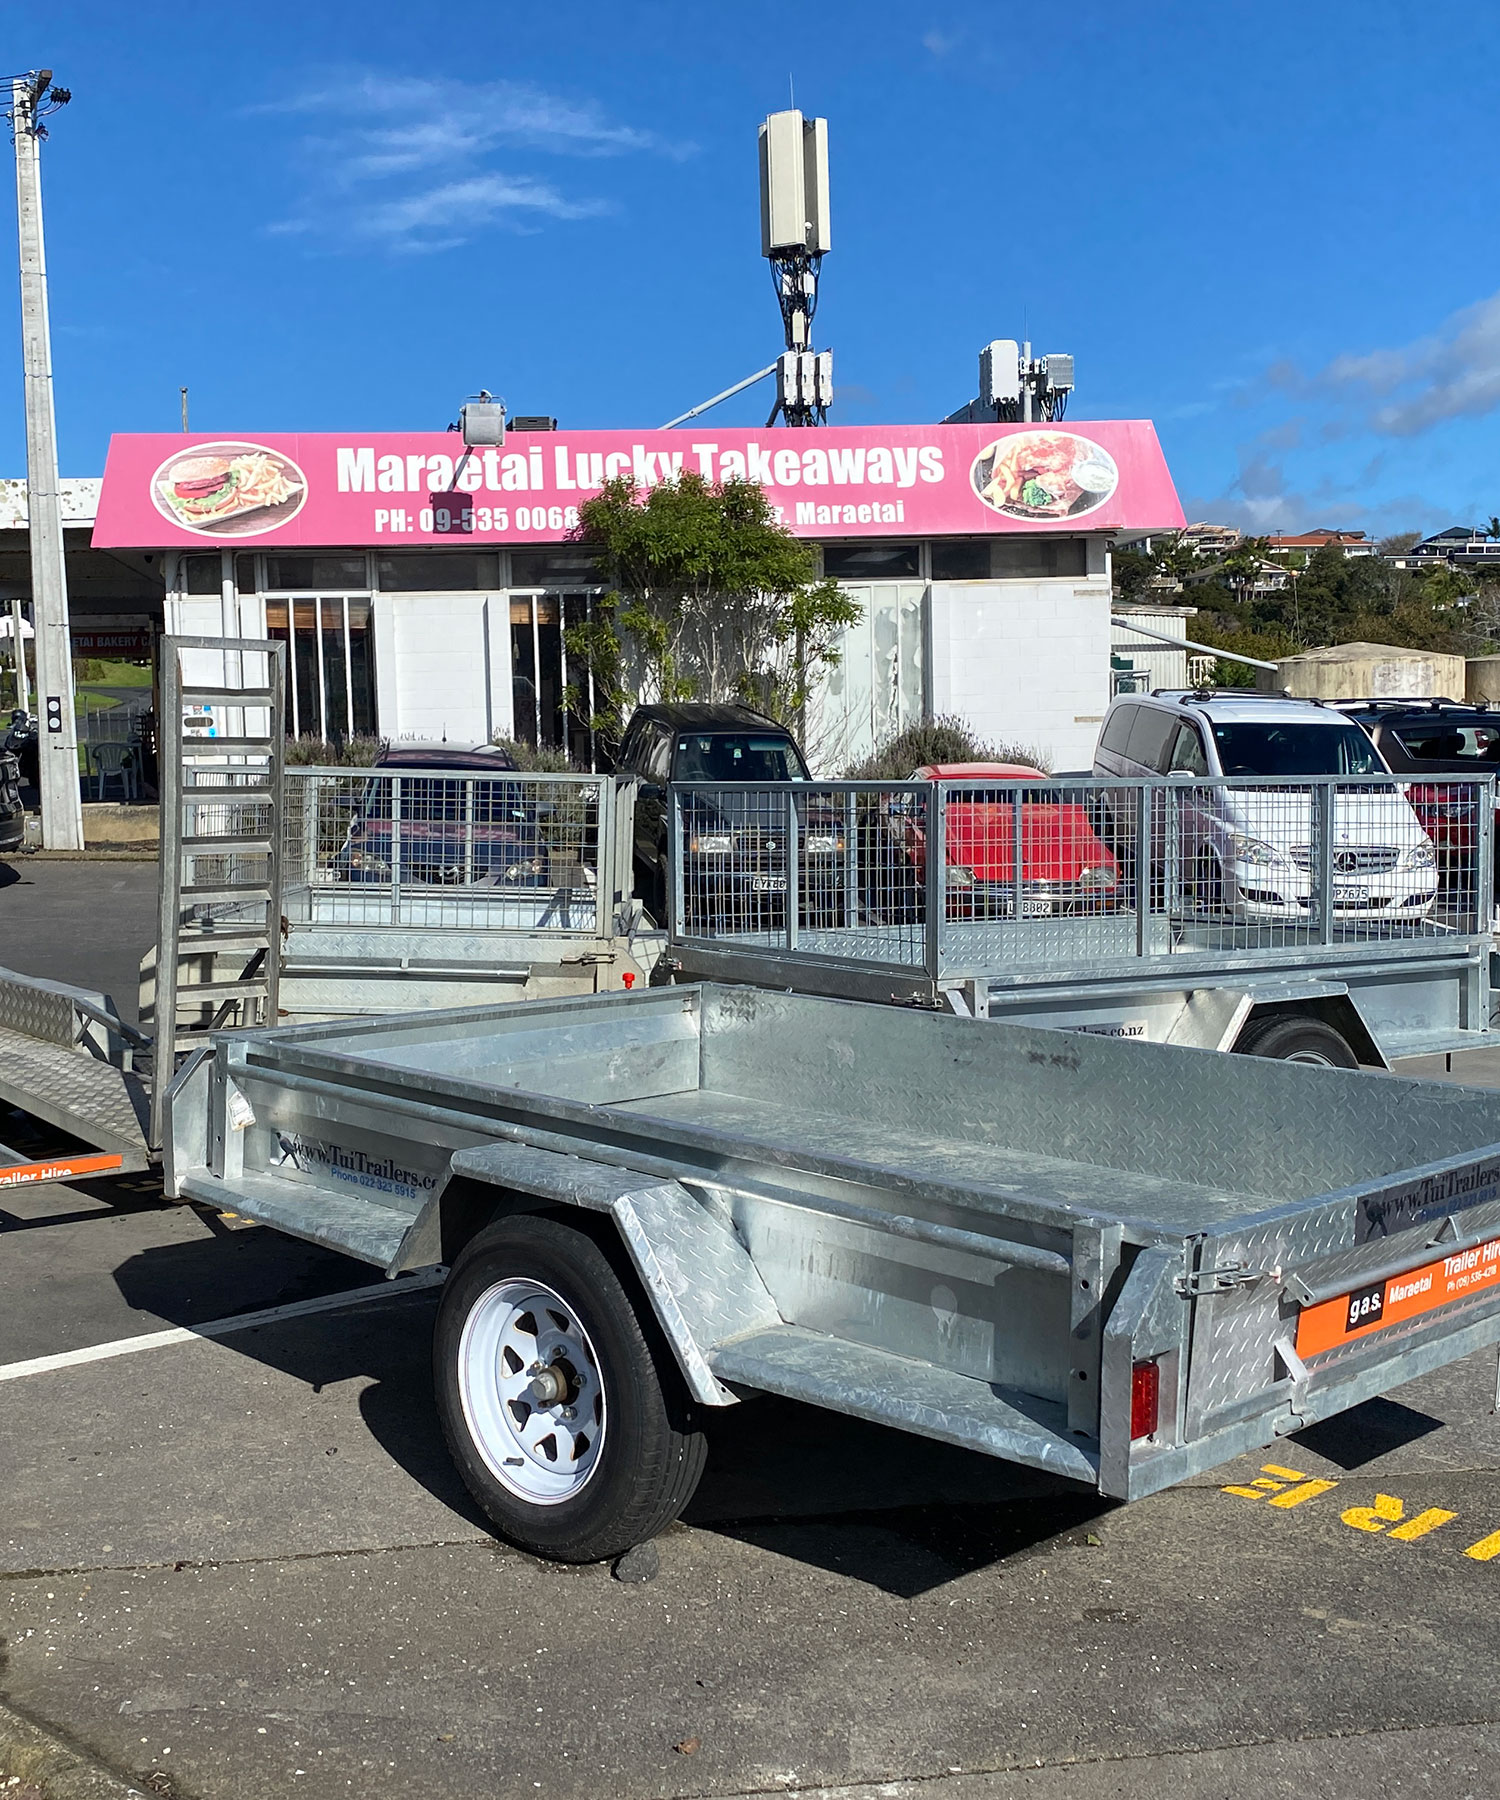 Trailers for rent at Gas Maraetai